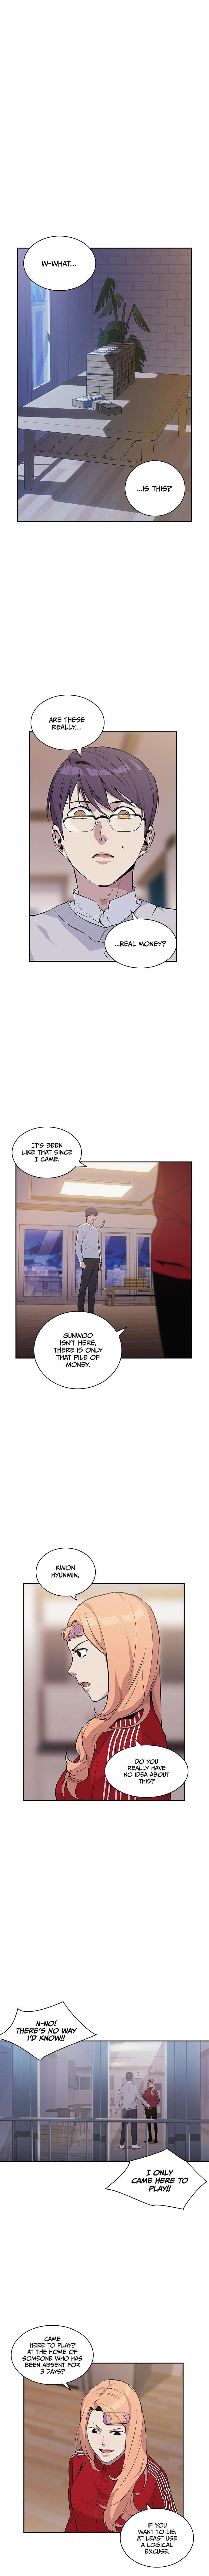 the-world-is-money-and-power-chap-33-1